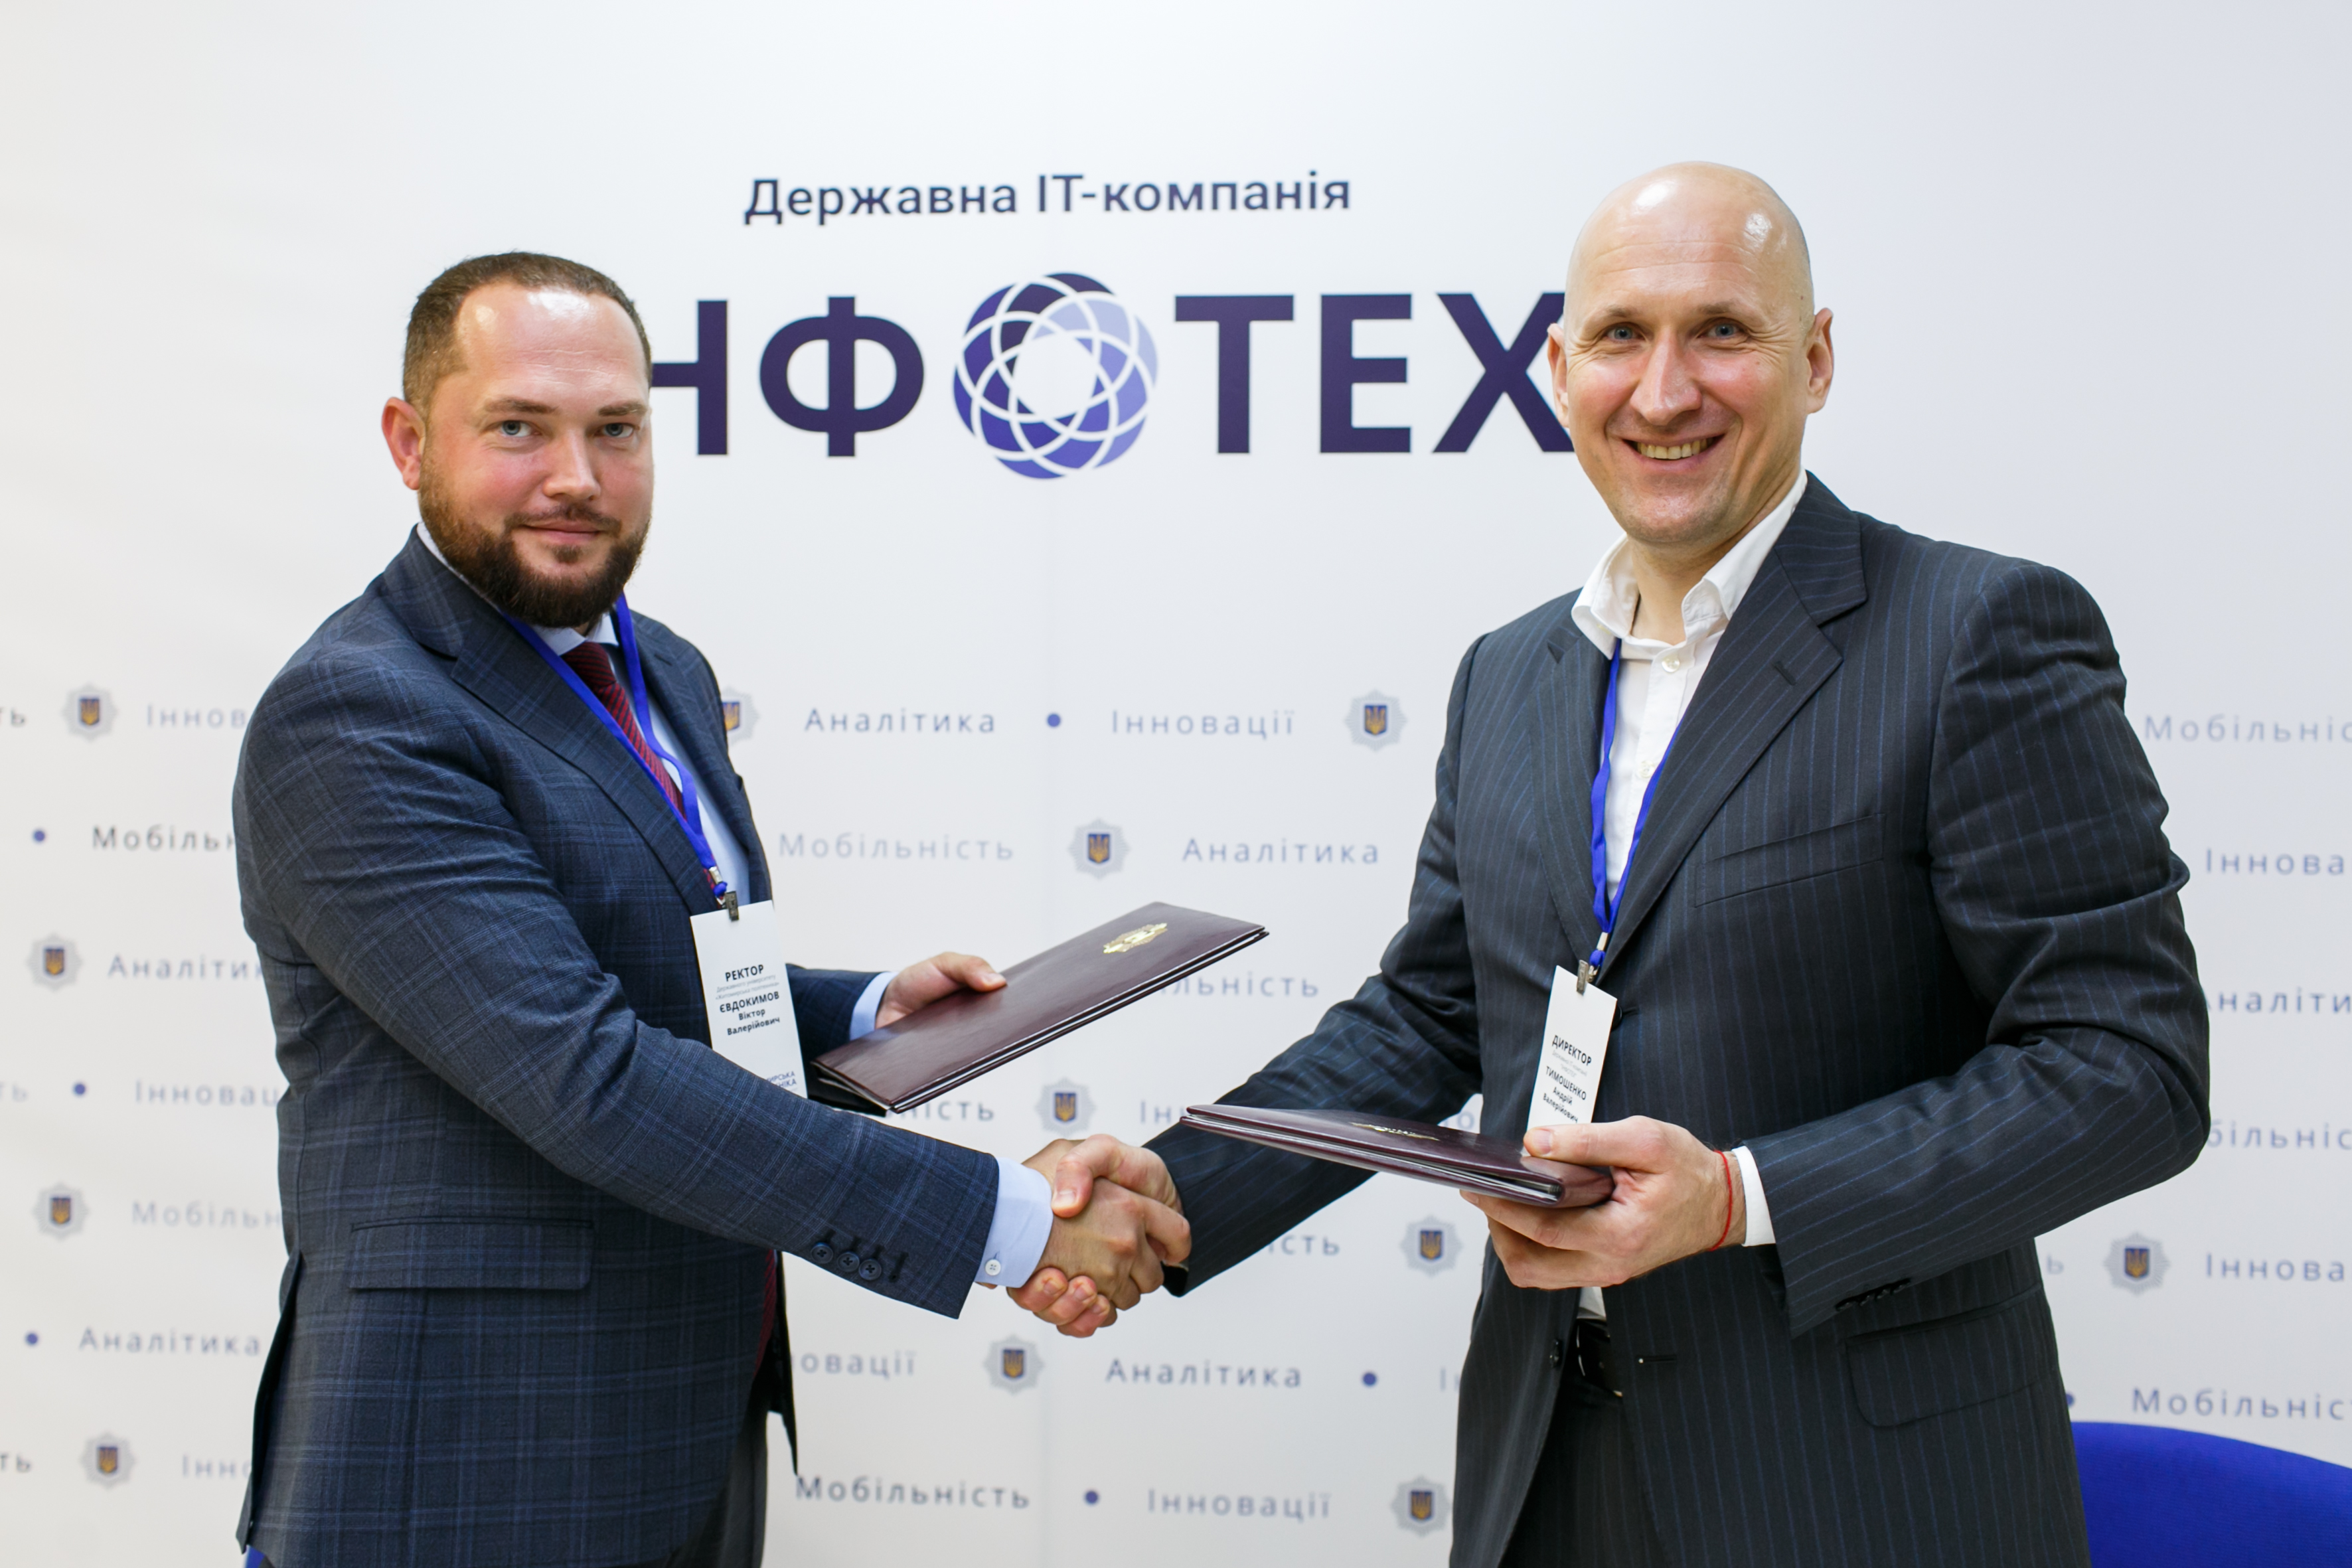 A memorandum of cooperation was signed between Infotech and Zhytomyr Polytechnic State University.